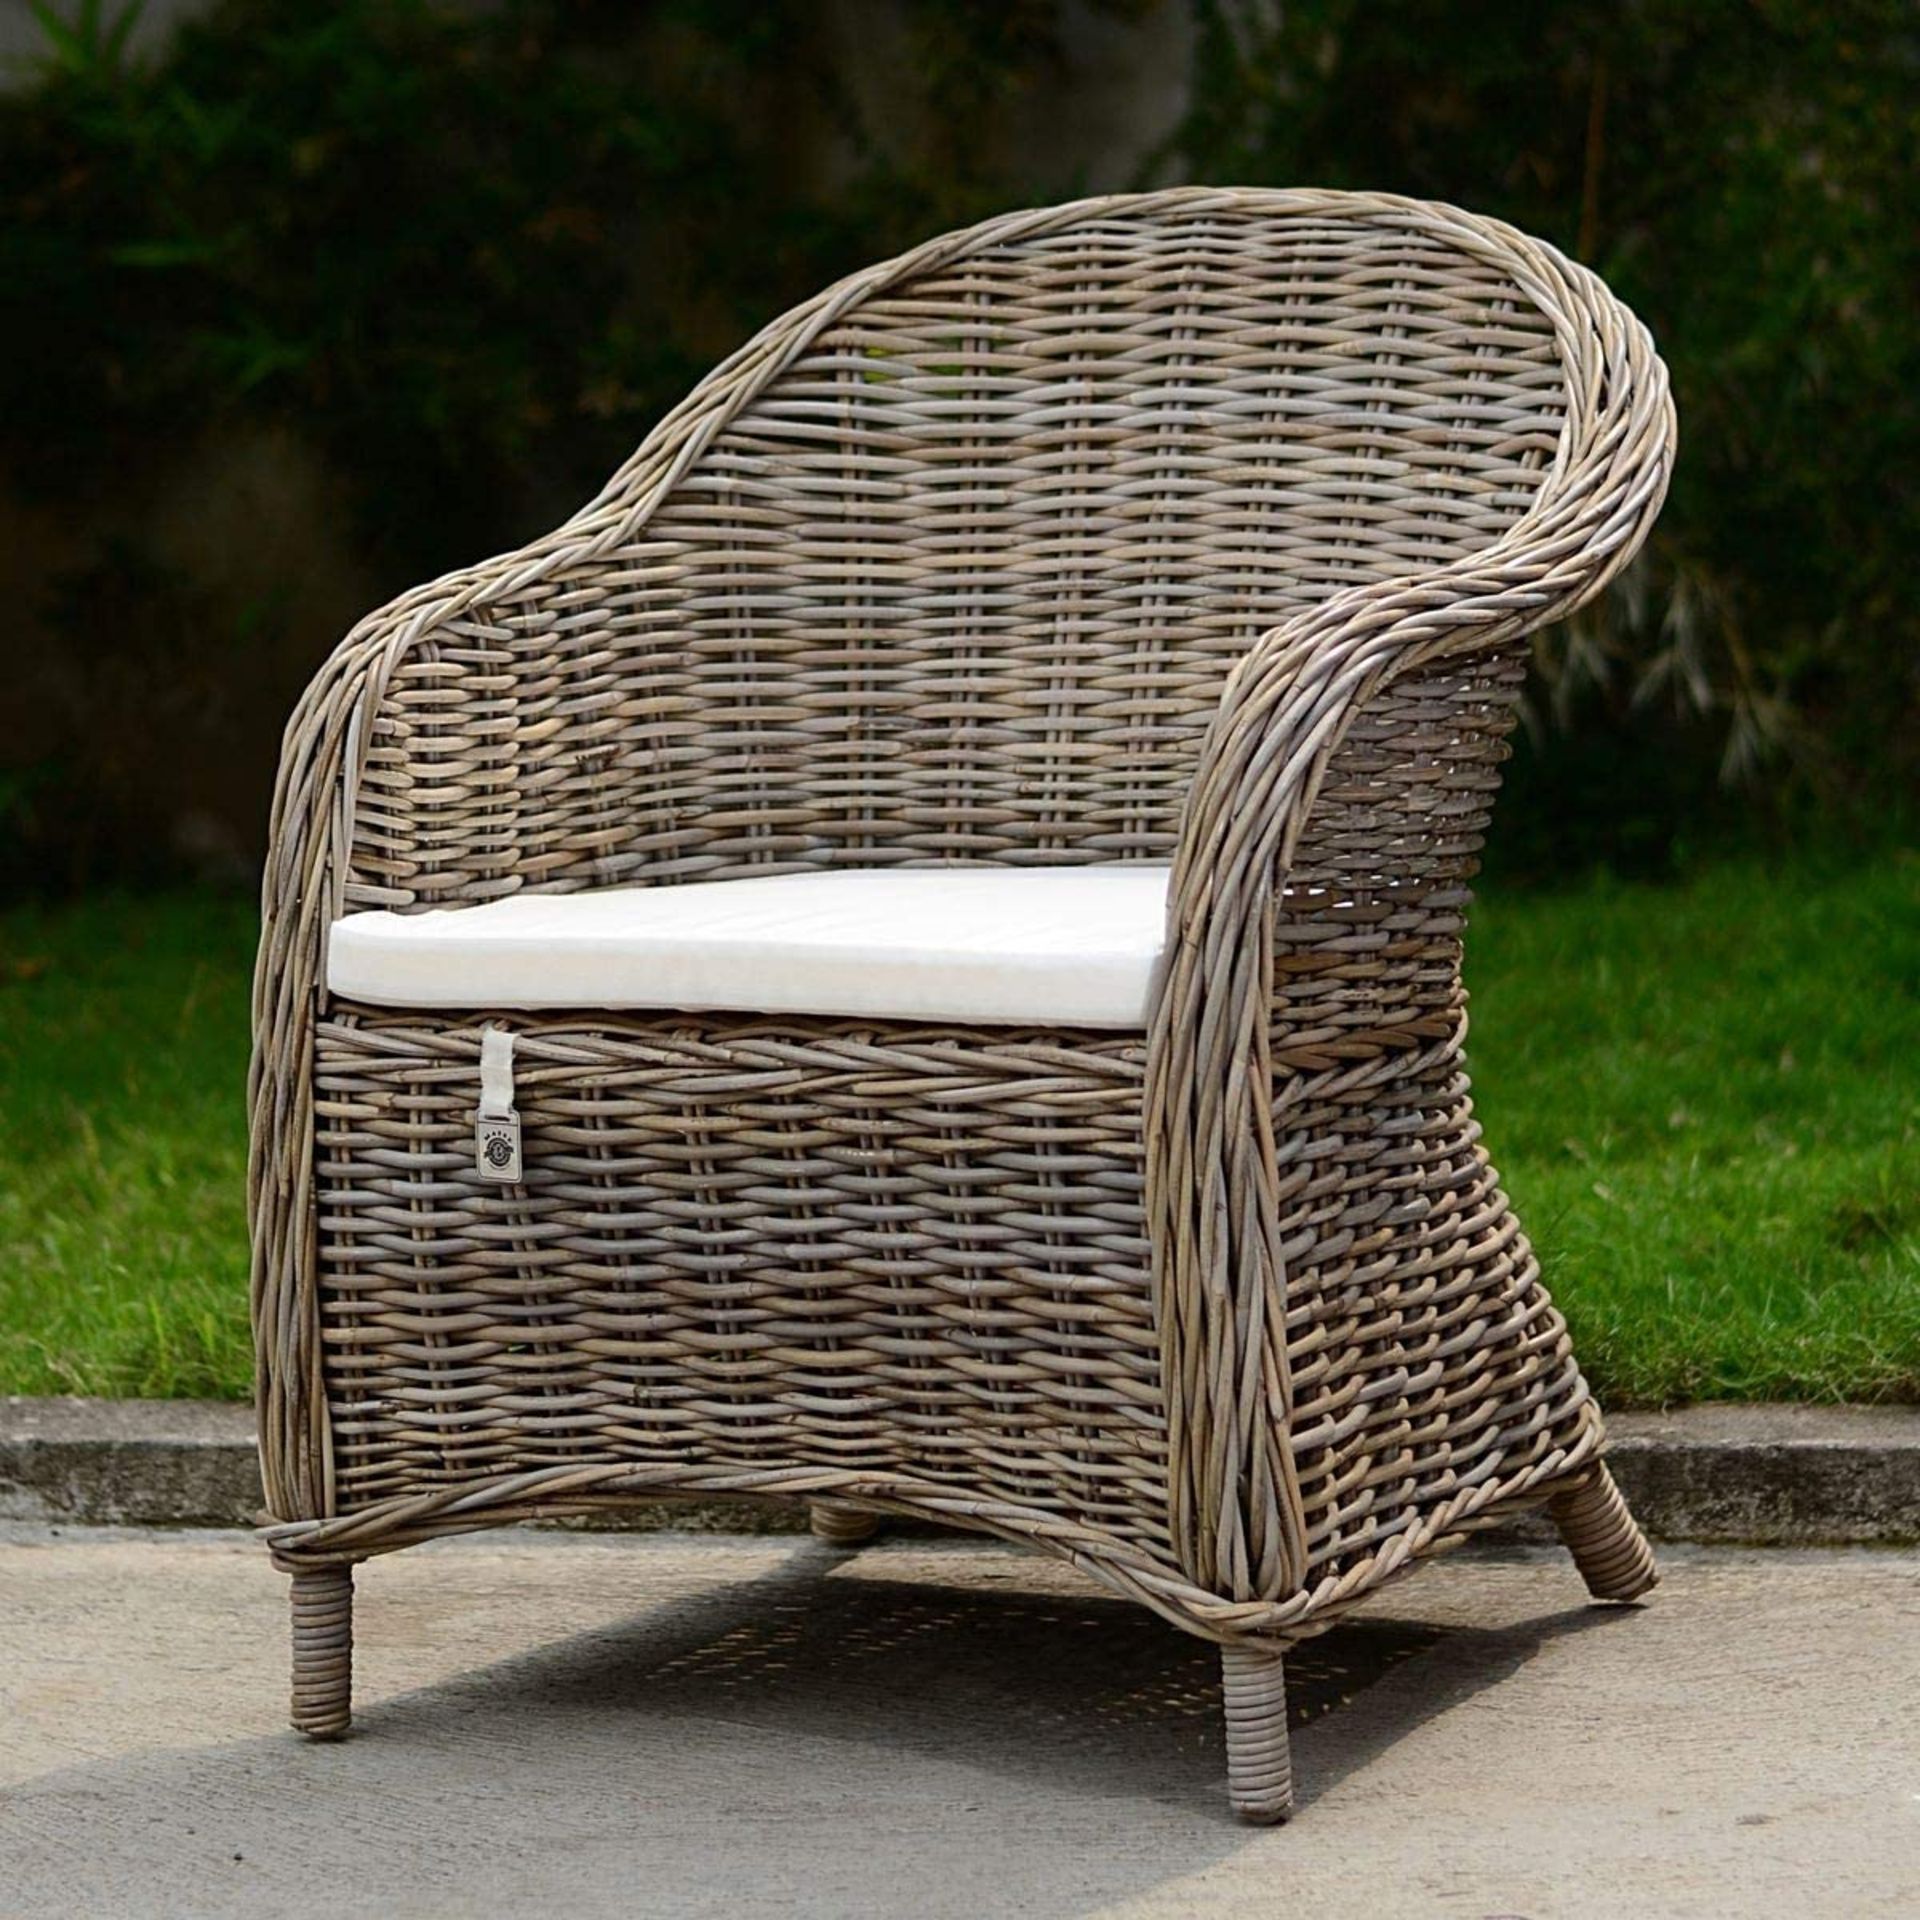 NEW & BOXED 2x Maine Furniture Co. Kubu Rattan Armchair with Cushion. (SR5). (SKU: M500156). STRONG, - Image 3 of 4